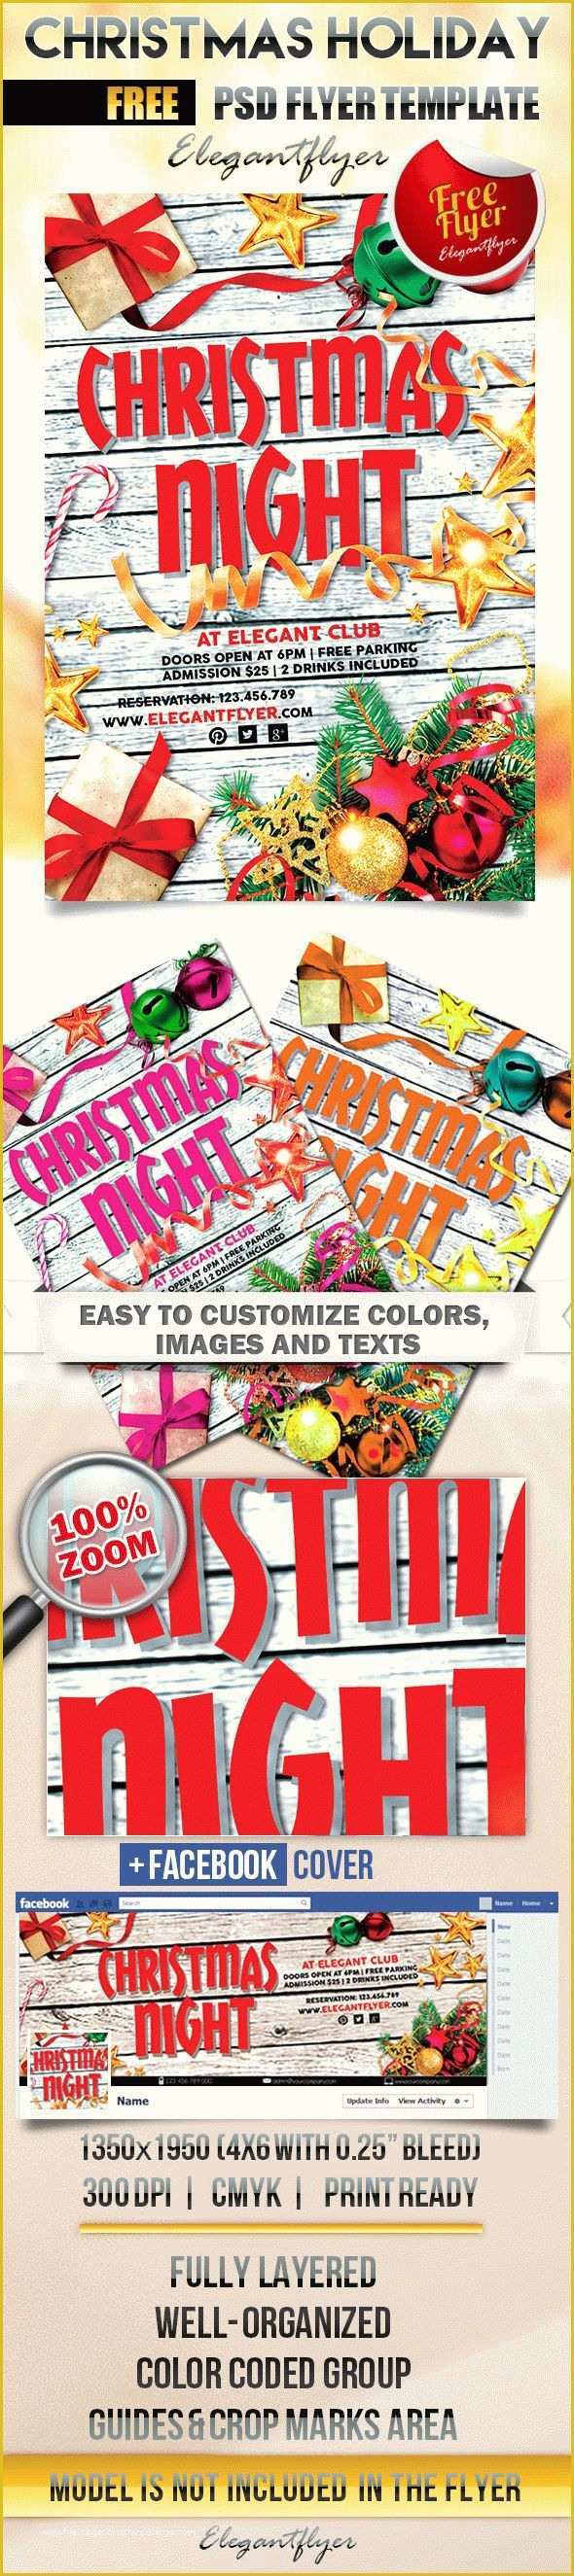 Free Christmas Flyer Design Templates Of Christmas Holiday – Free Flyer Psd Template – by Elegantflyer